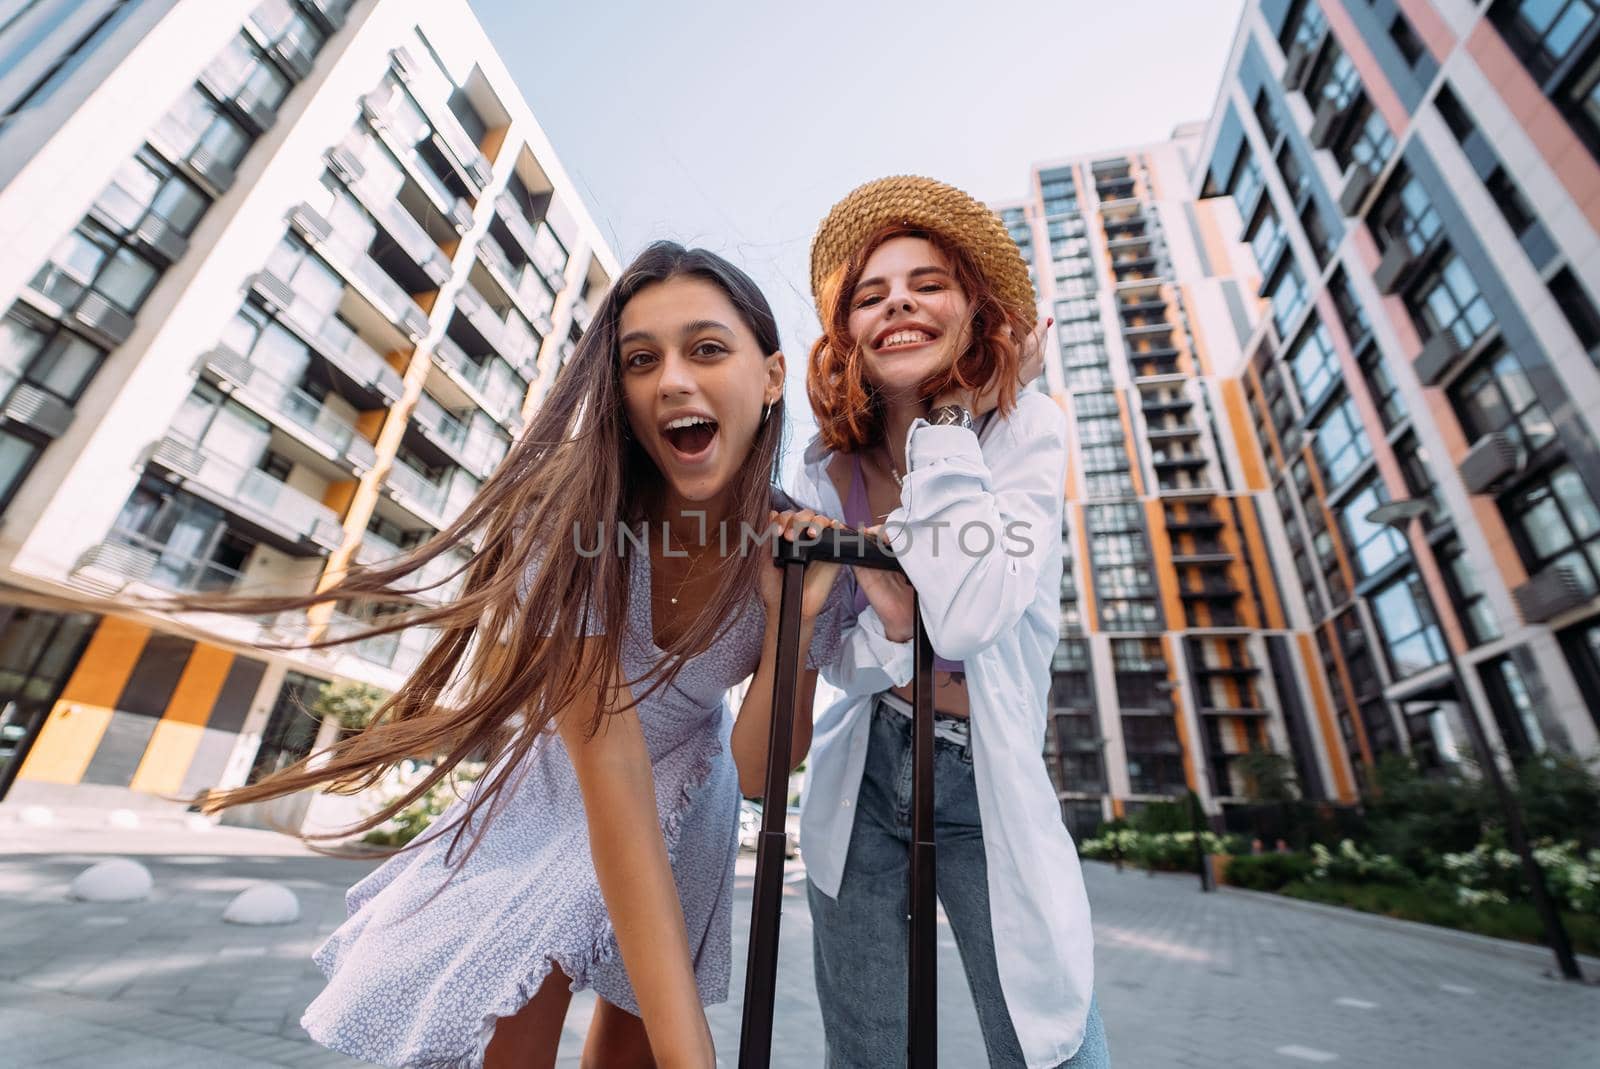 Two women are looking at the camera on the street